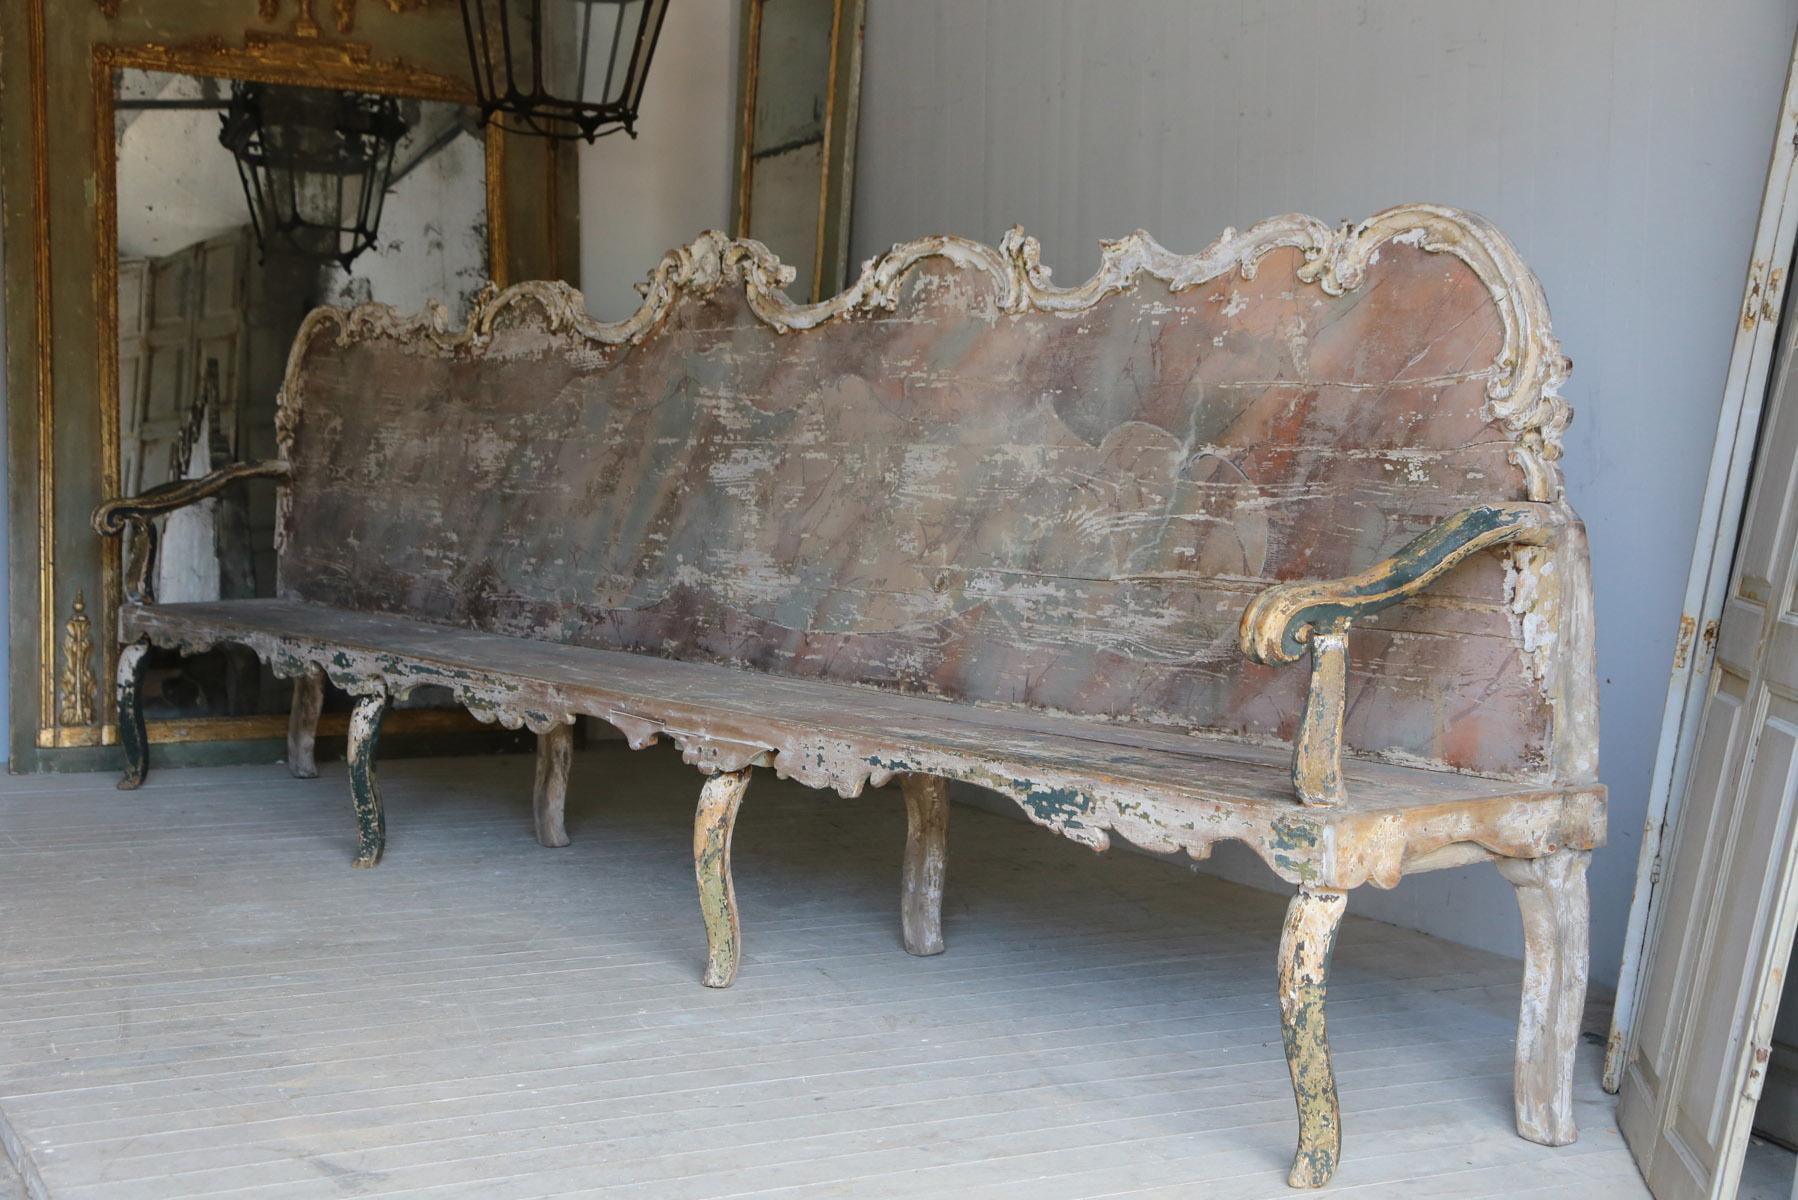 Exceptional Grande Pair of  17thC /Early 18thC Italian Painted Baroque Benches
An exceptional pair of late 17th early 18th Century Italian Painted Baroque Benches magnificent in proportion with wonderful carving and delicate paintwork.These benches